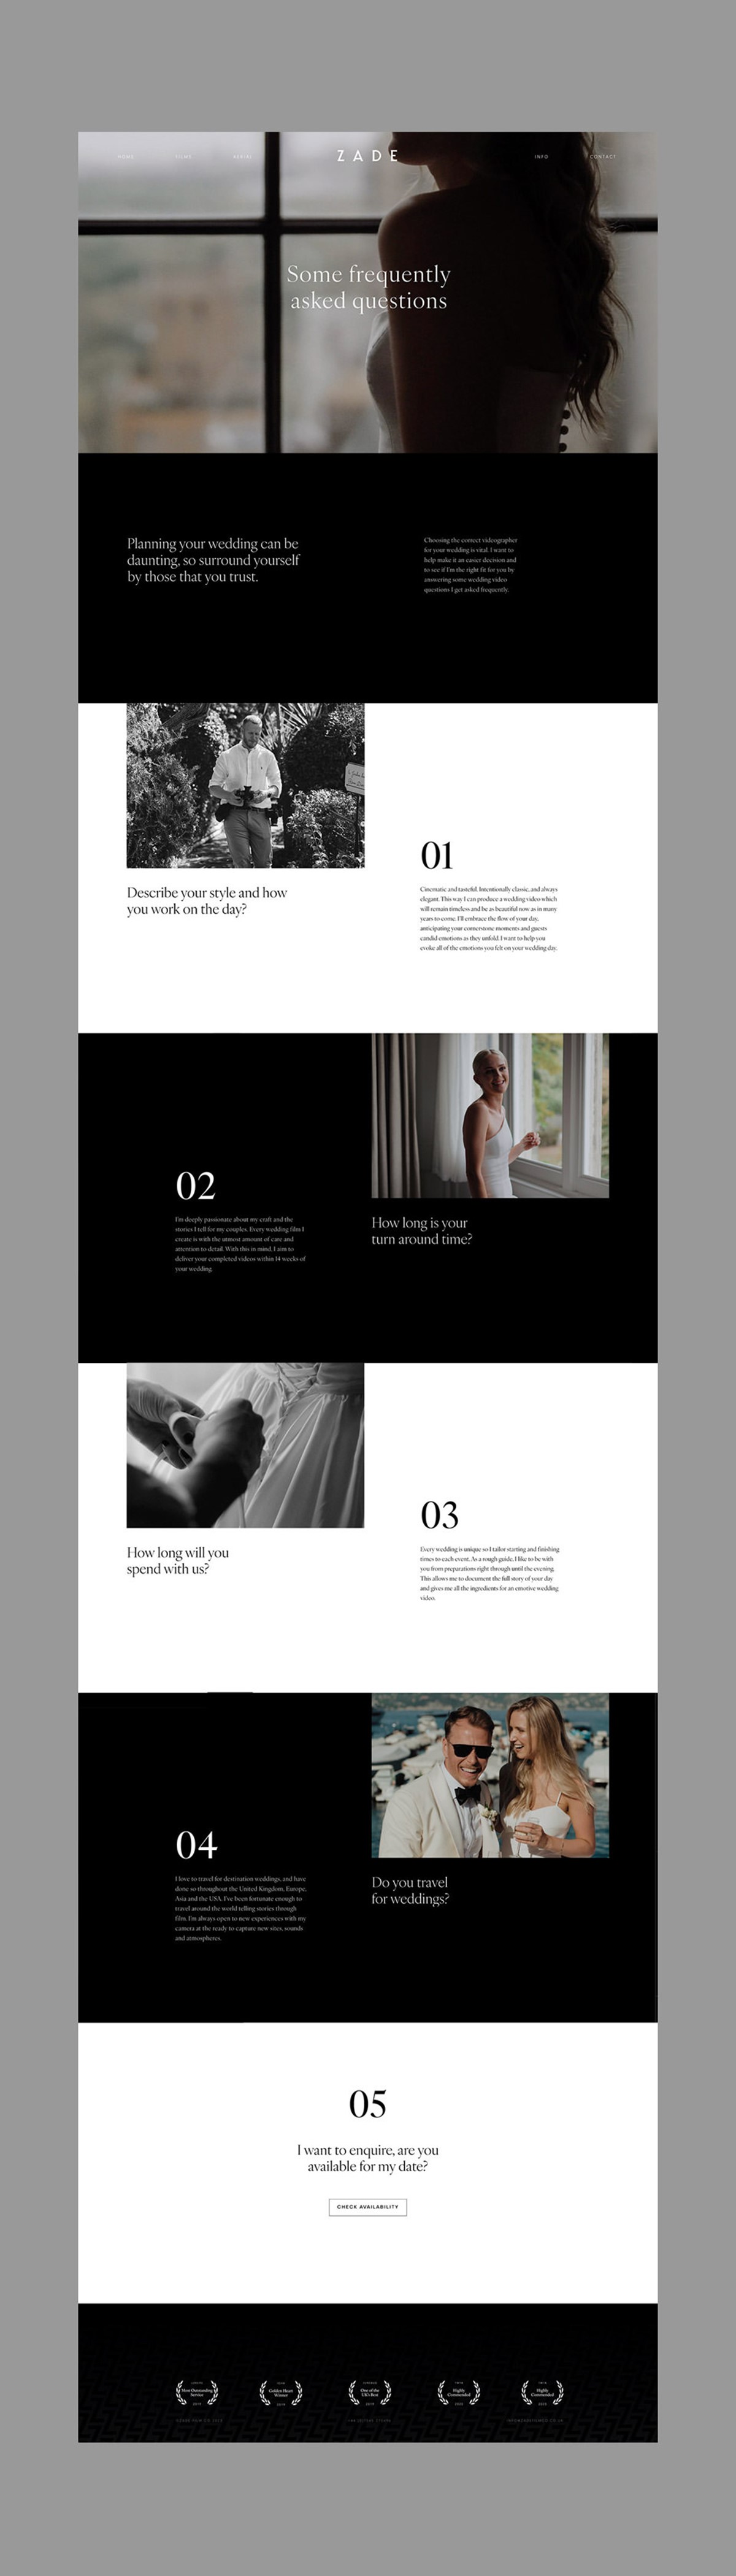 Zade Film Co. FAQs page. Website design + strategy by Superfried design studio, Manchester.